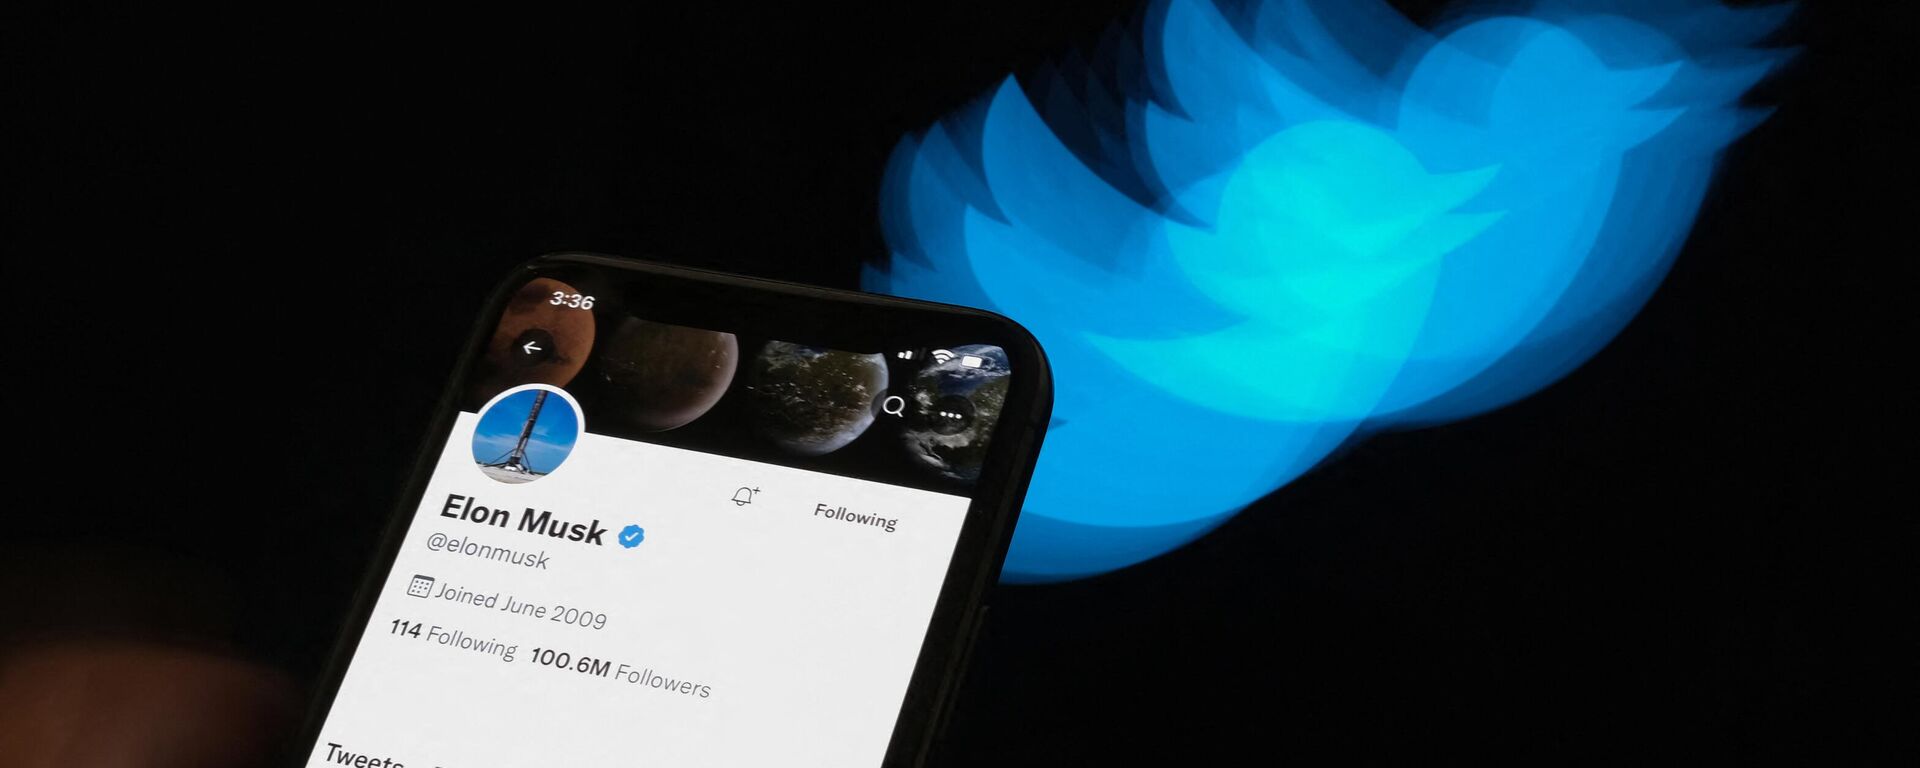 Elon Musk's Twitter page displayed on the screen of a smartphone with Twitter logo in the background in Los Angeles. - Sputnik International, 1920, 11.12.2022